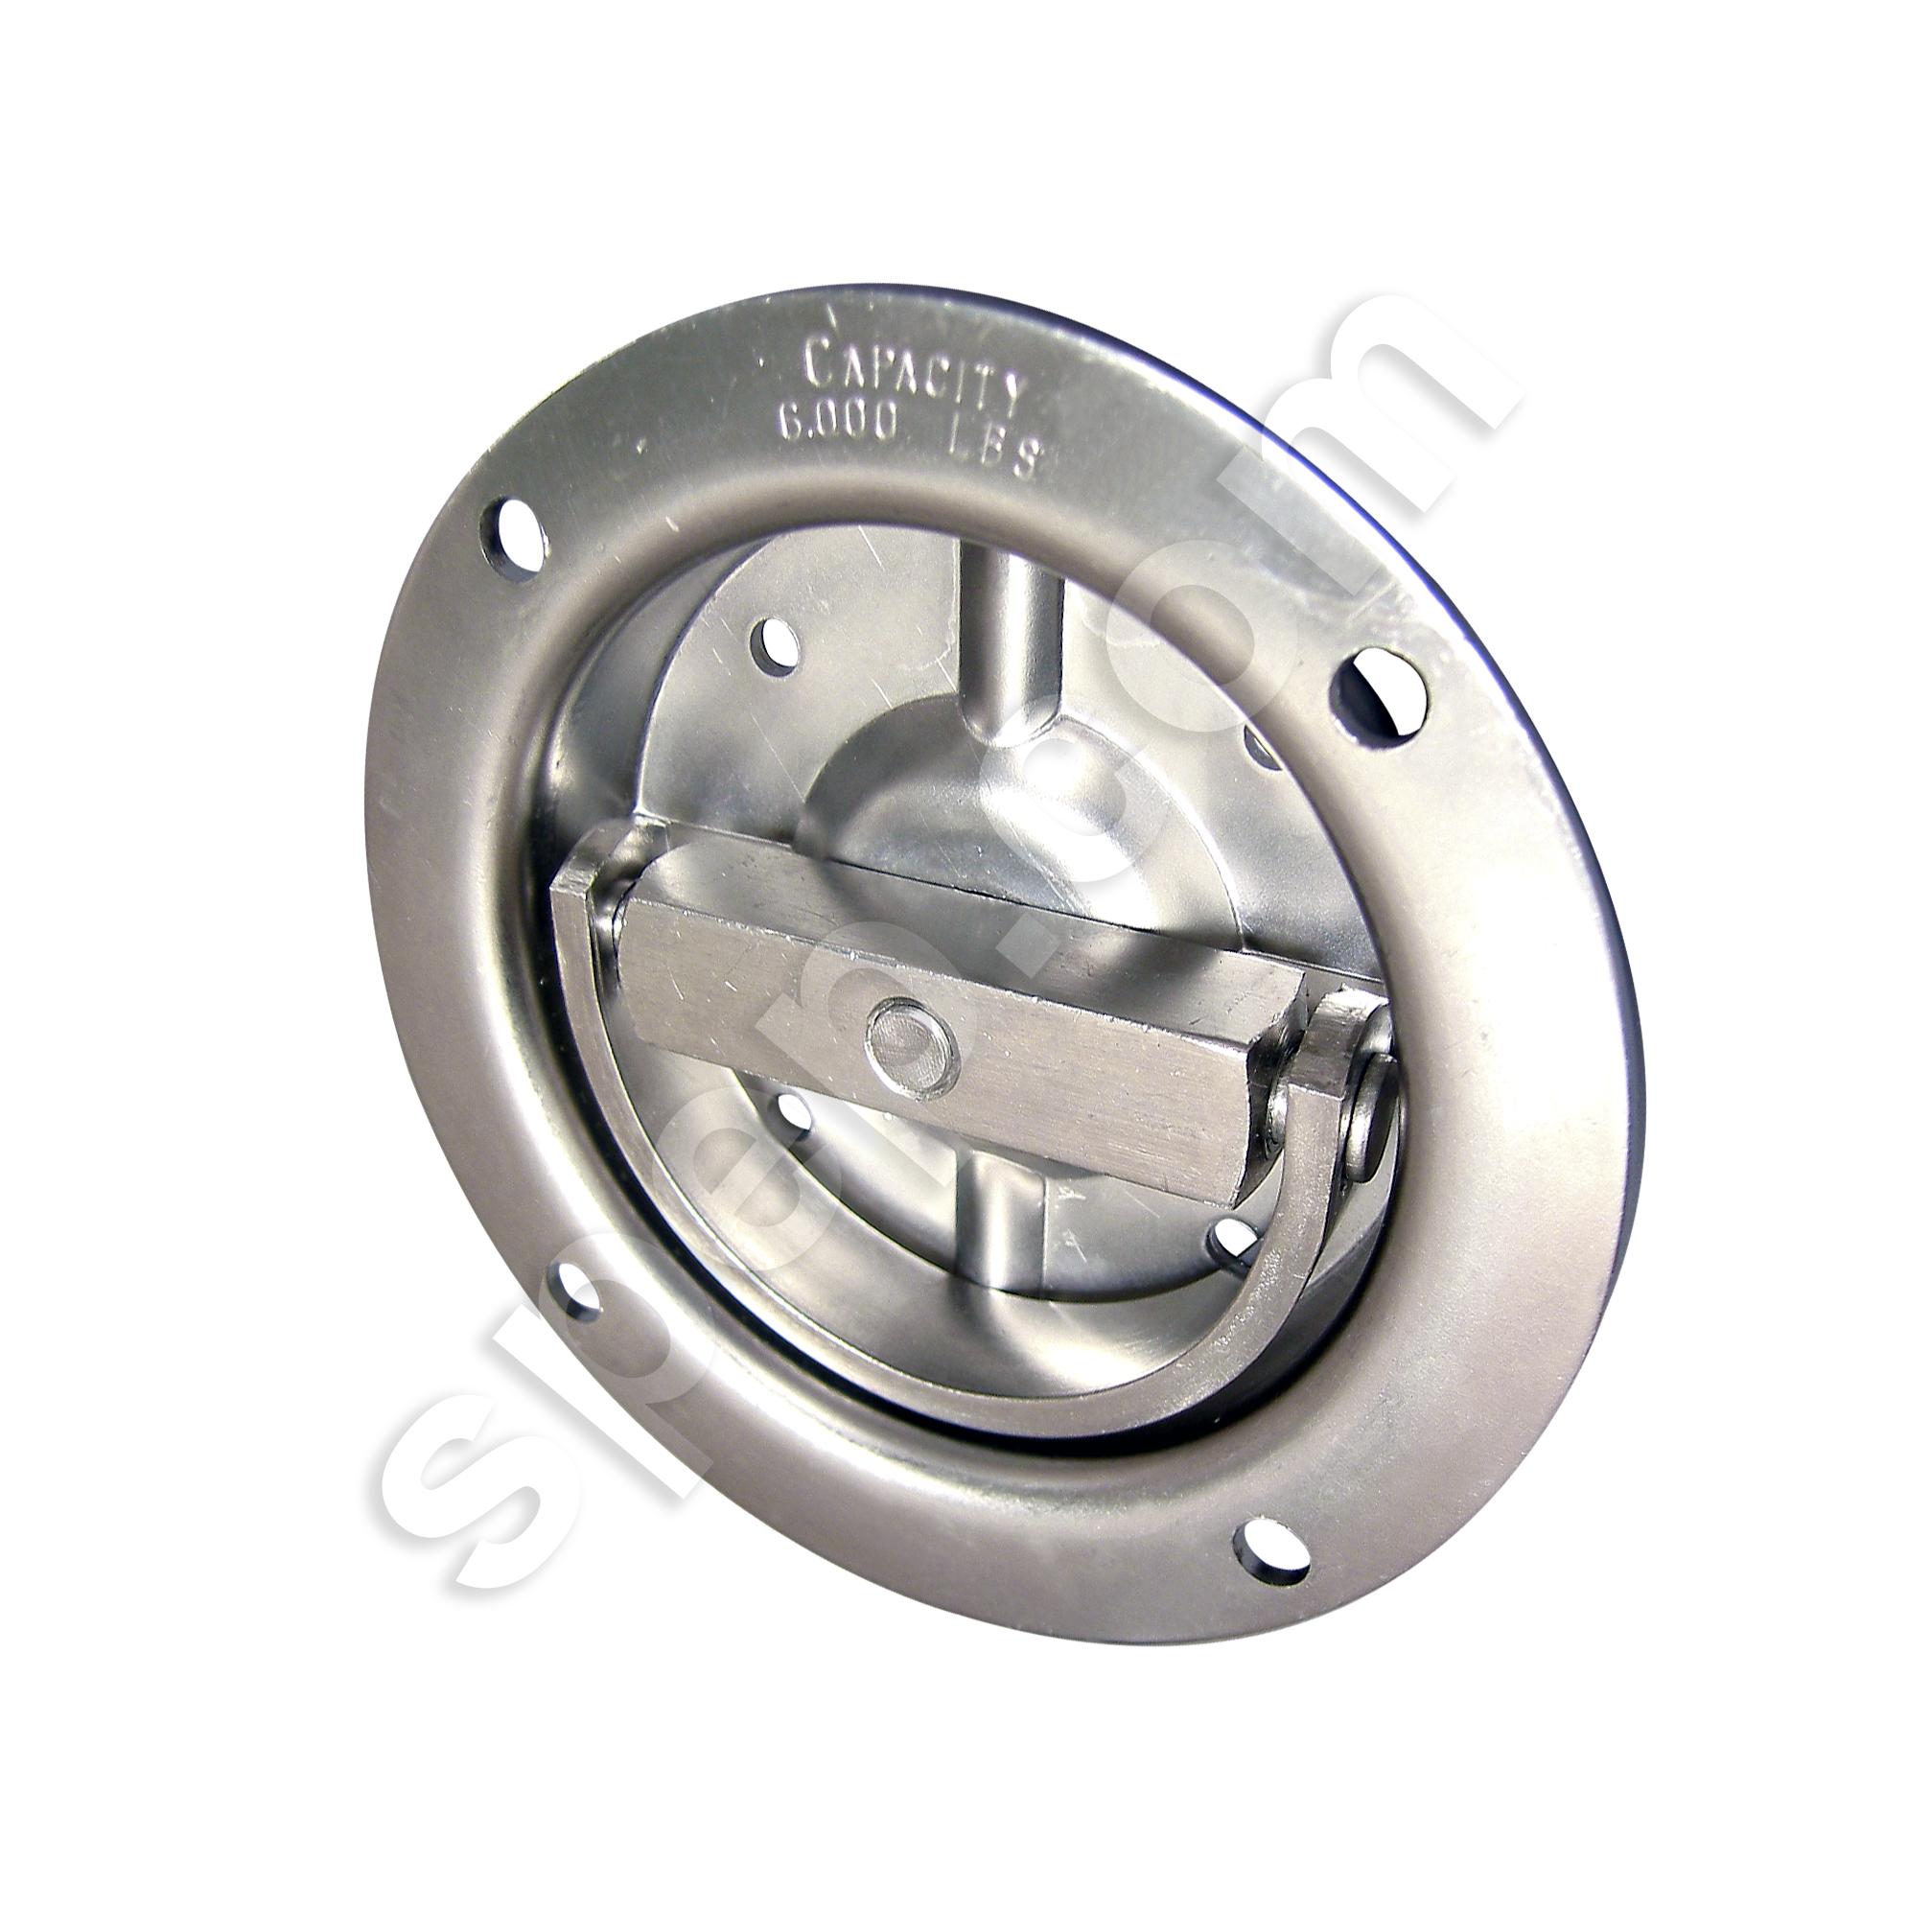 Stainless Steel Recessed Swivel D-Ring (M-901) - 6,000 lb. Cap